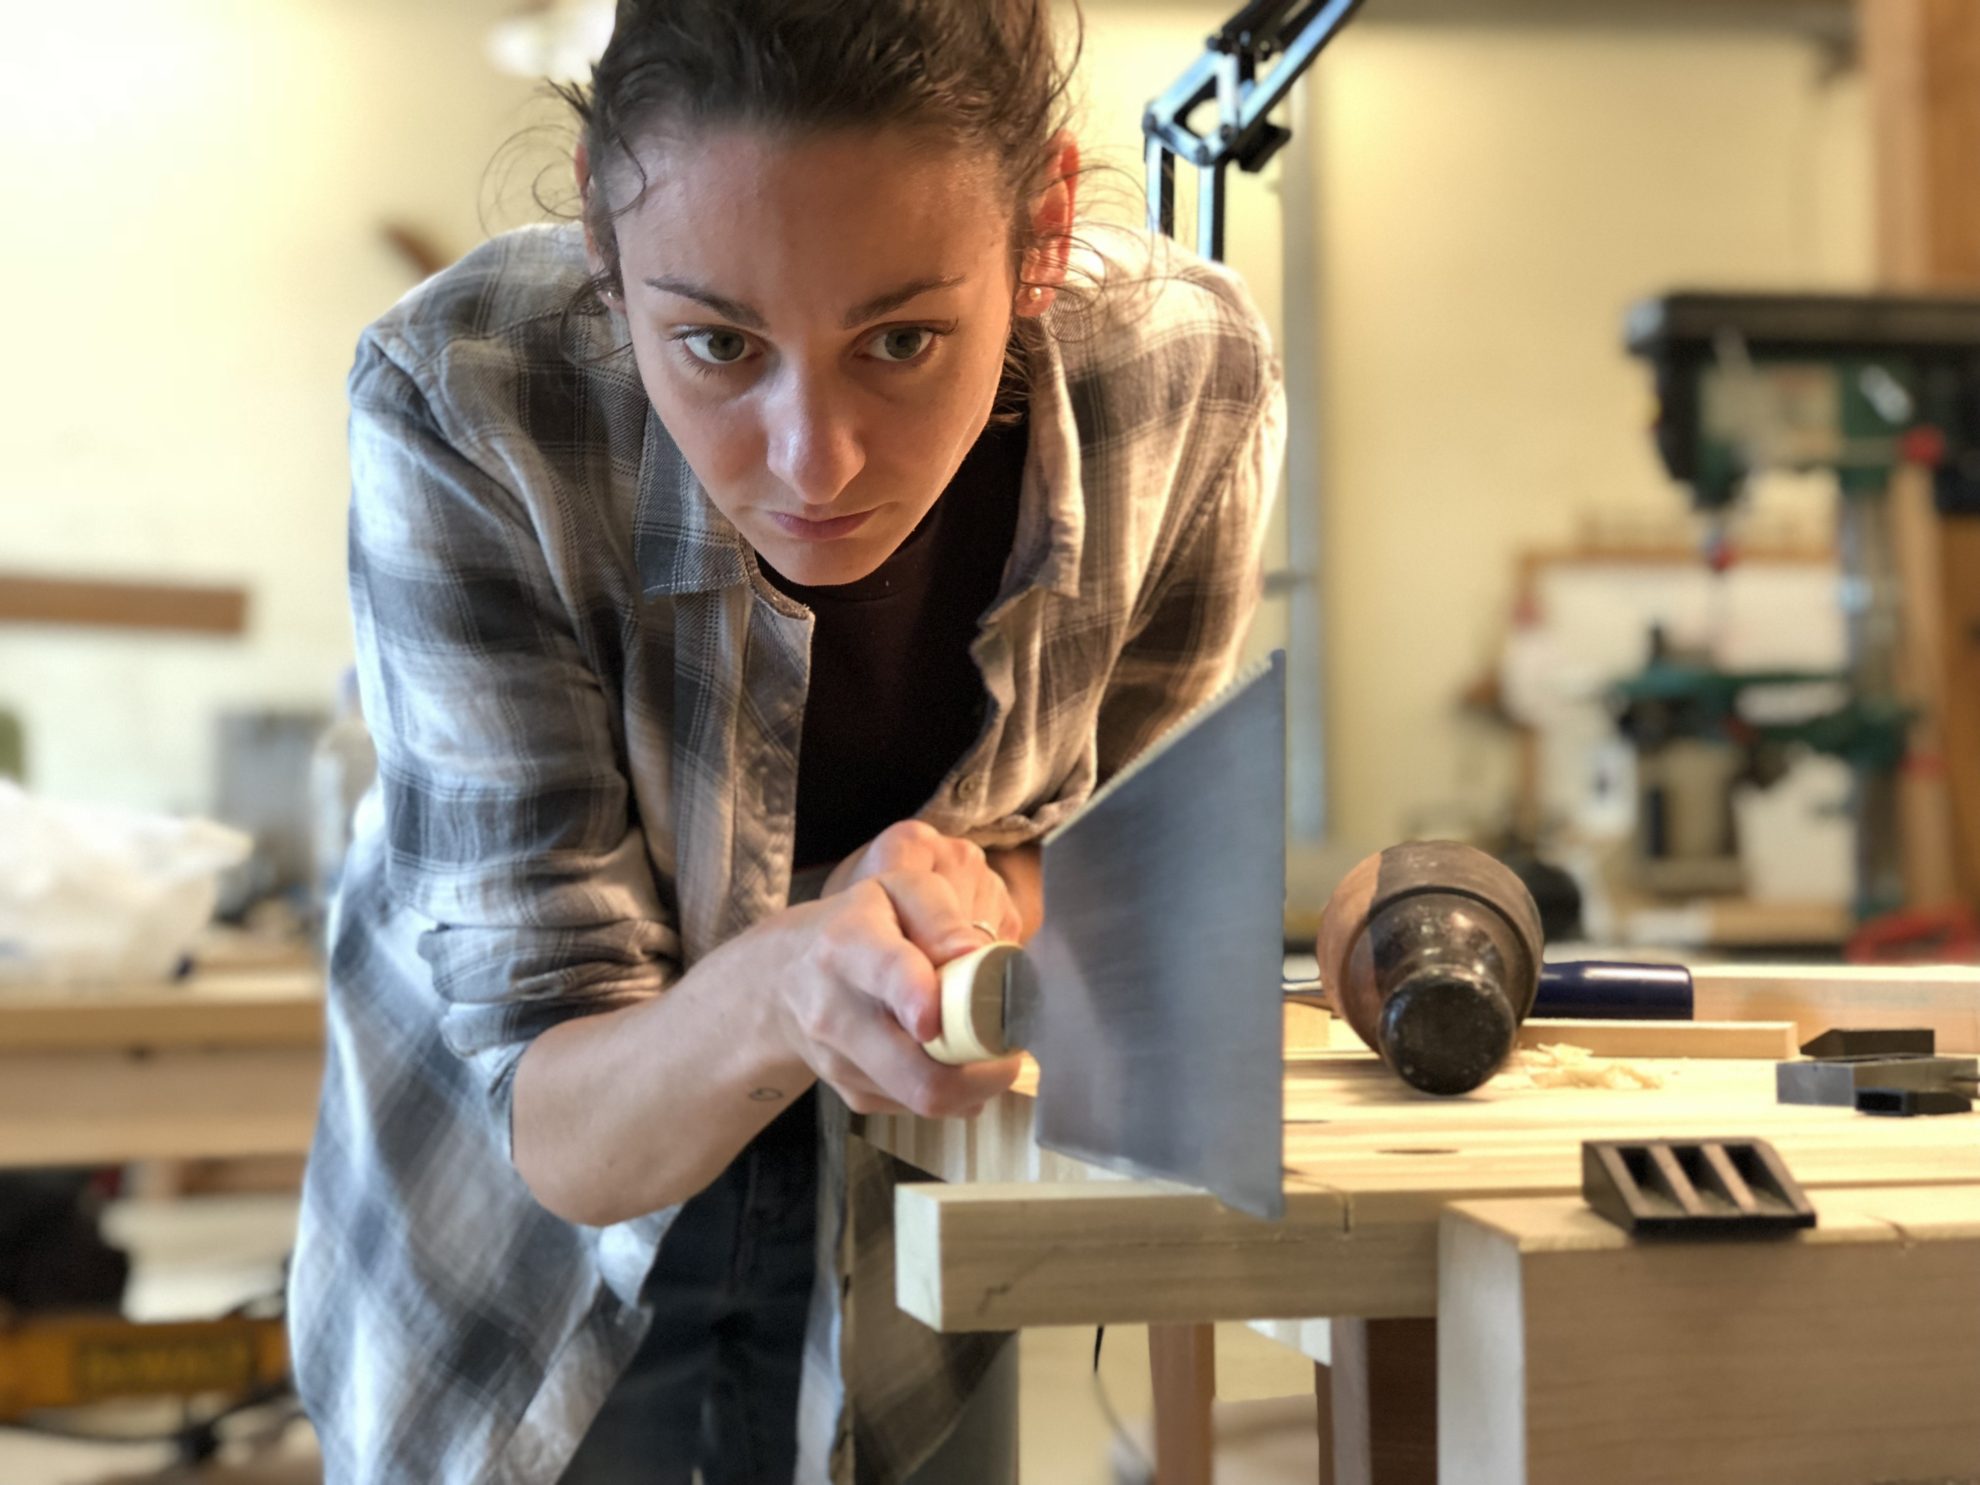 Japanese saw, women with tools, woodworking classes